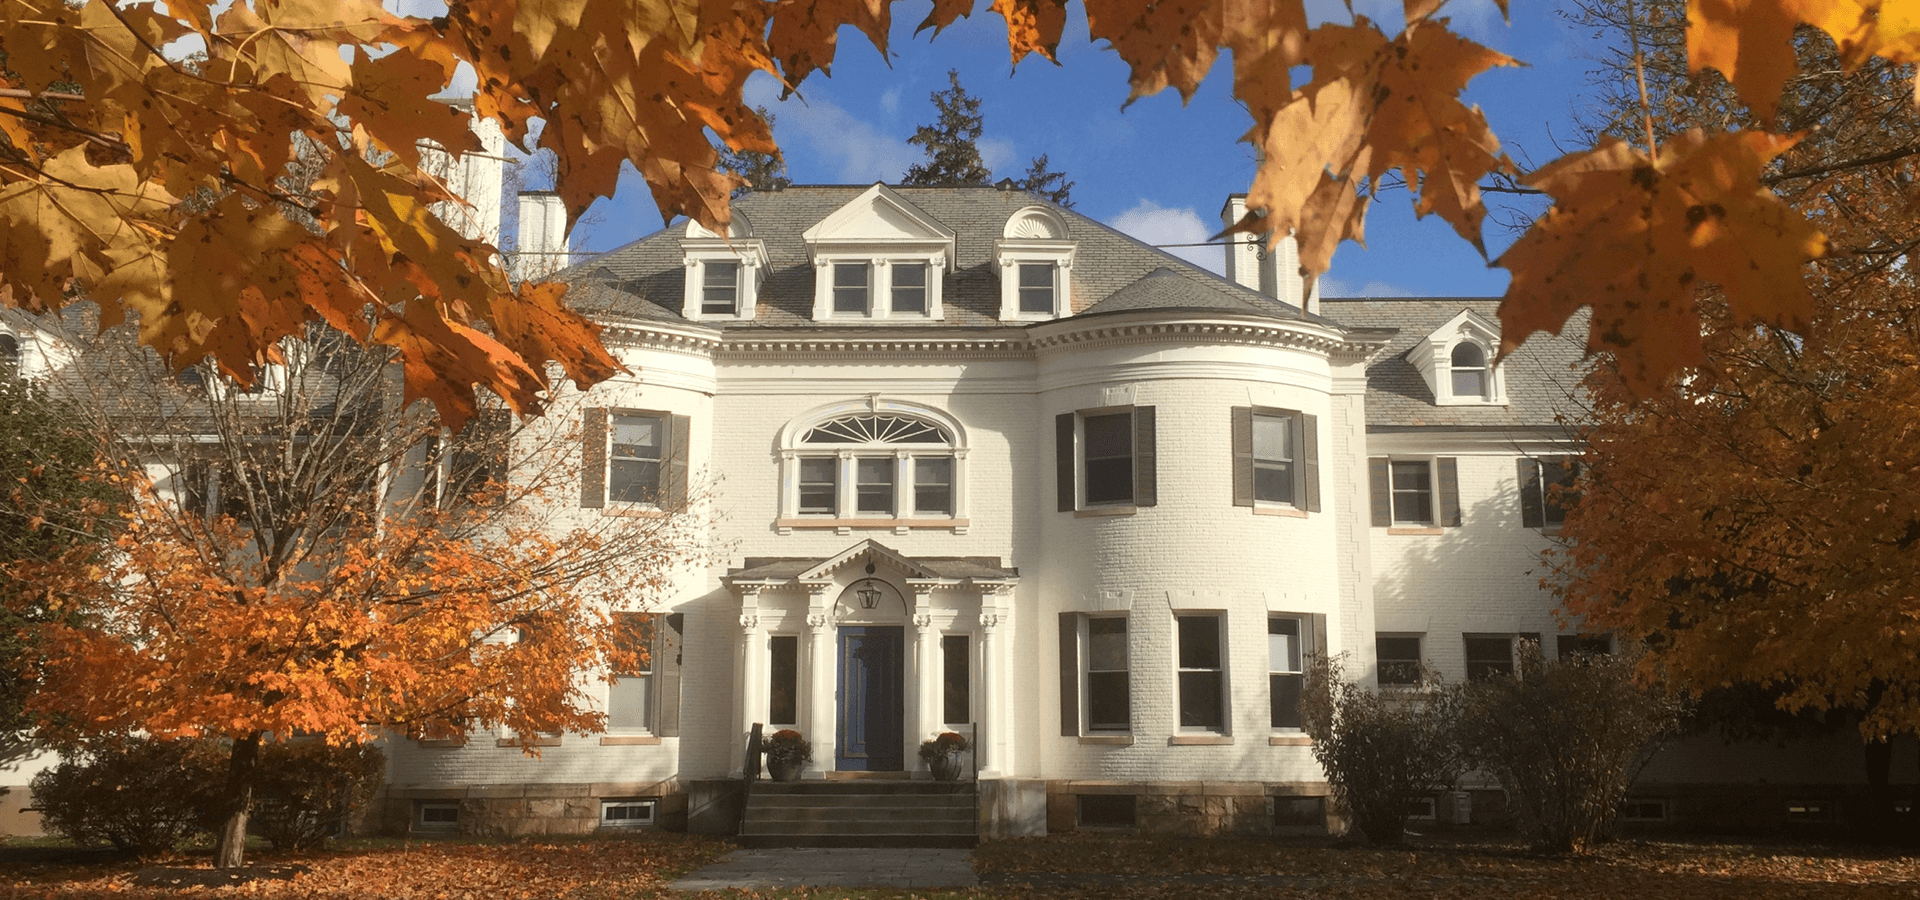 Historic house on the campus of Austen Riggs Center among fall foliage